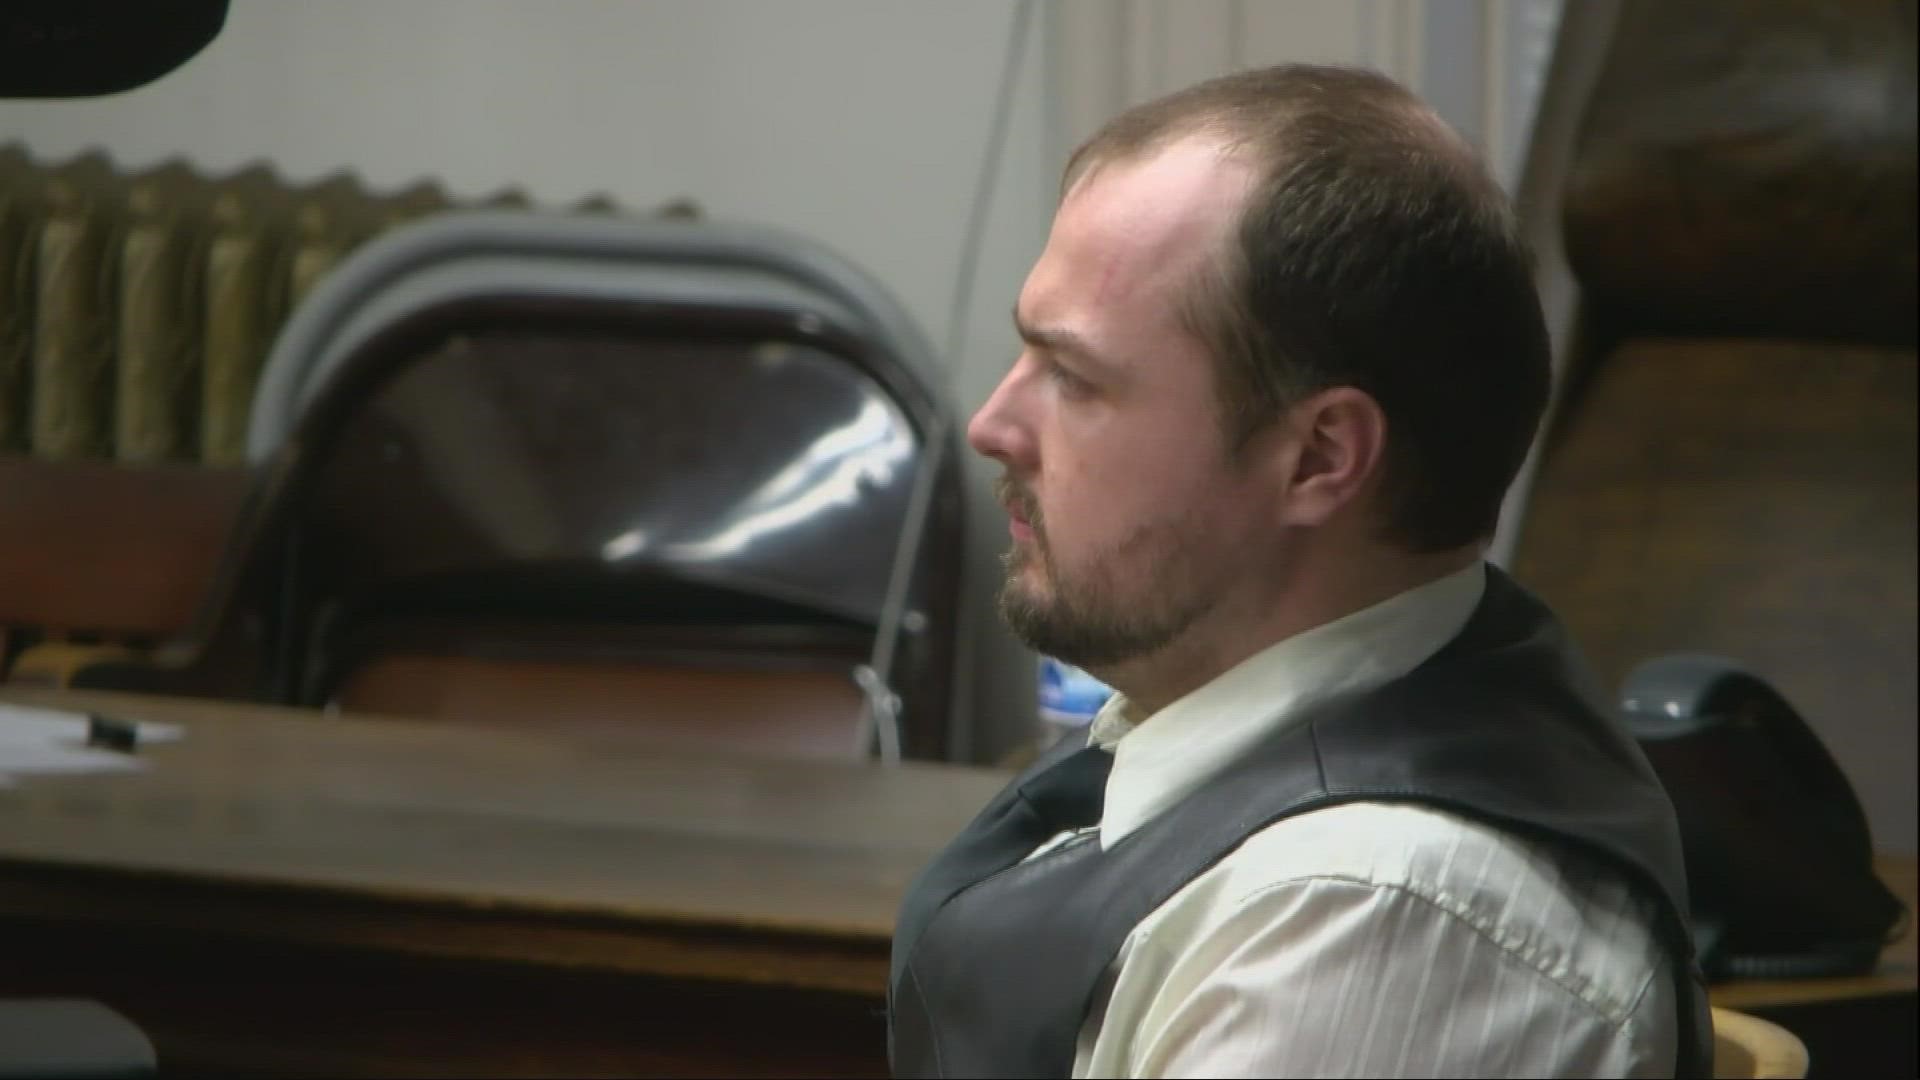 George Wagner IV, 31, was found guilty of eight counts of aggravated murder in the 2016 shootings of seven adults and a teenager in Pike County.